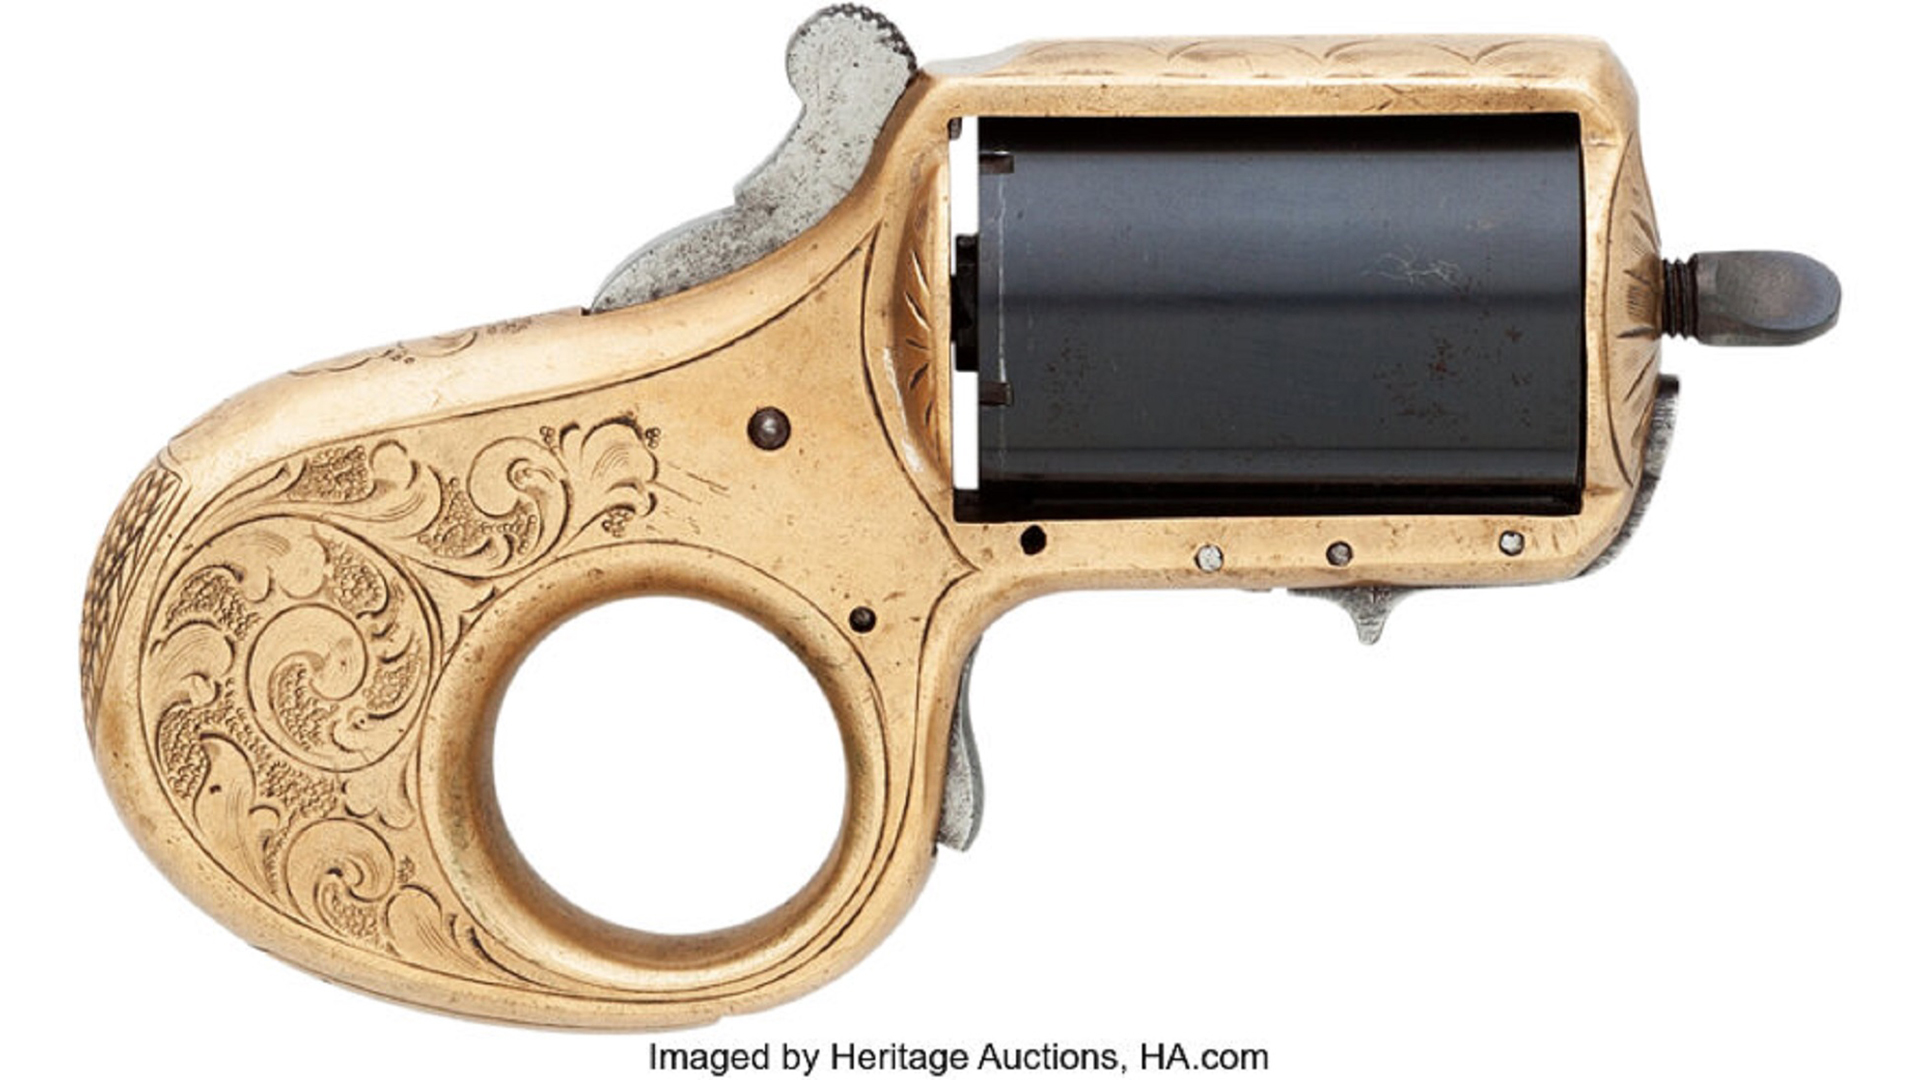 James Reid knuckle-duster revolver right-side view brass frame black cylinder text on image noting IMAGED BY HERITAGE AUCTIONS, HA.COM